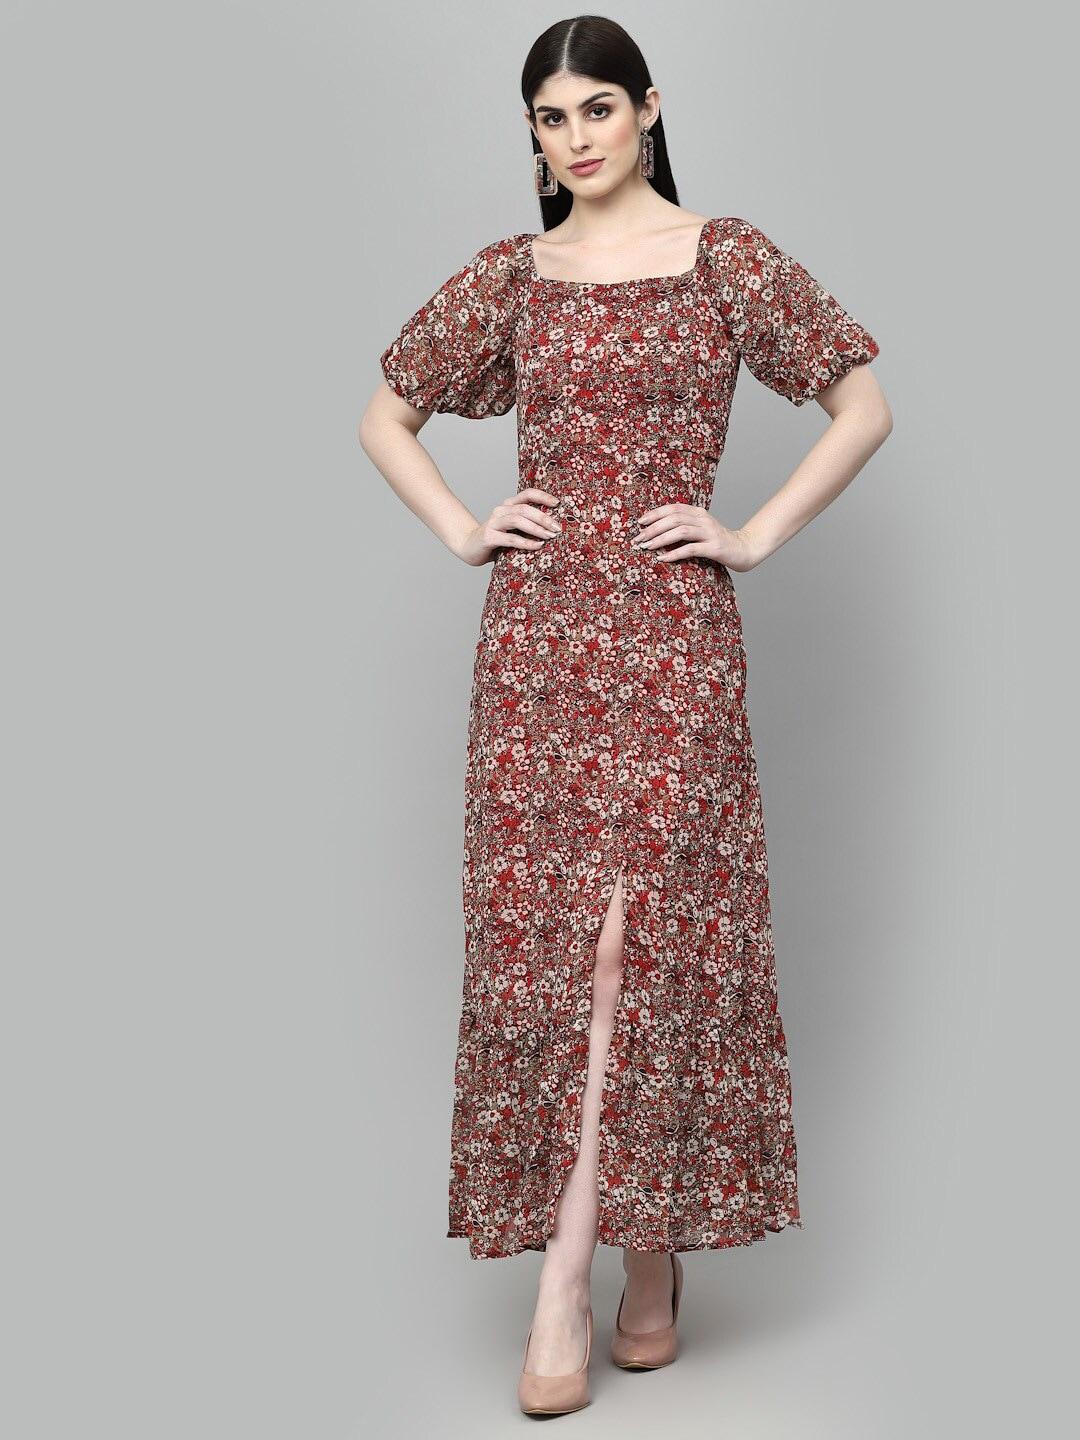 aayu red floral print puff sleeve georgette maxi dress